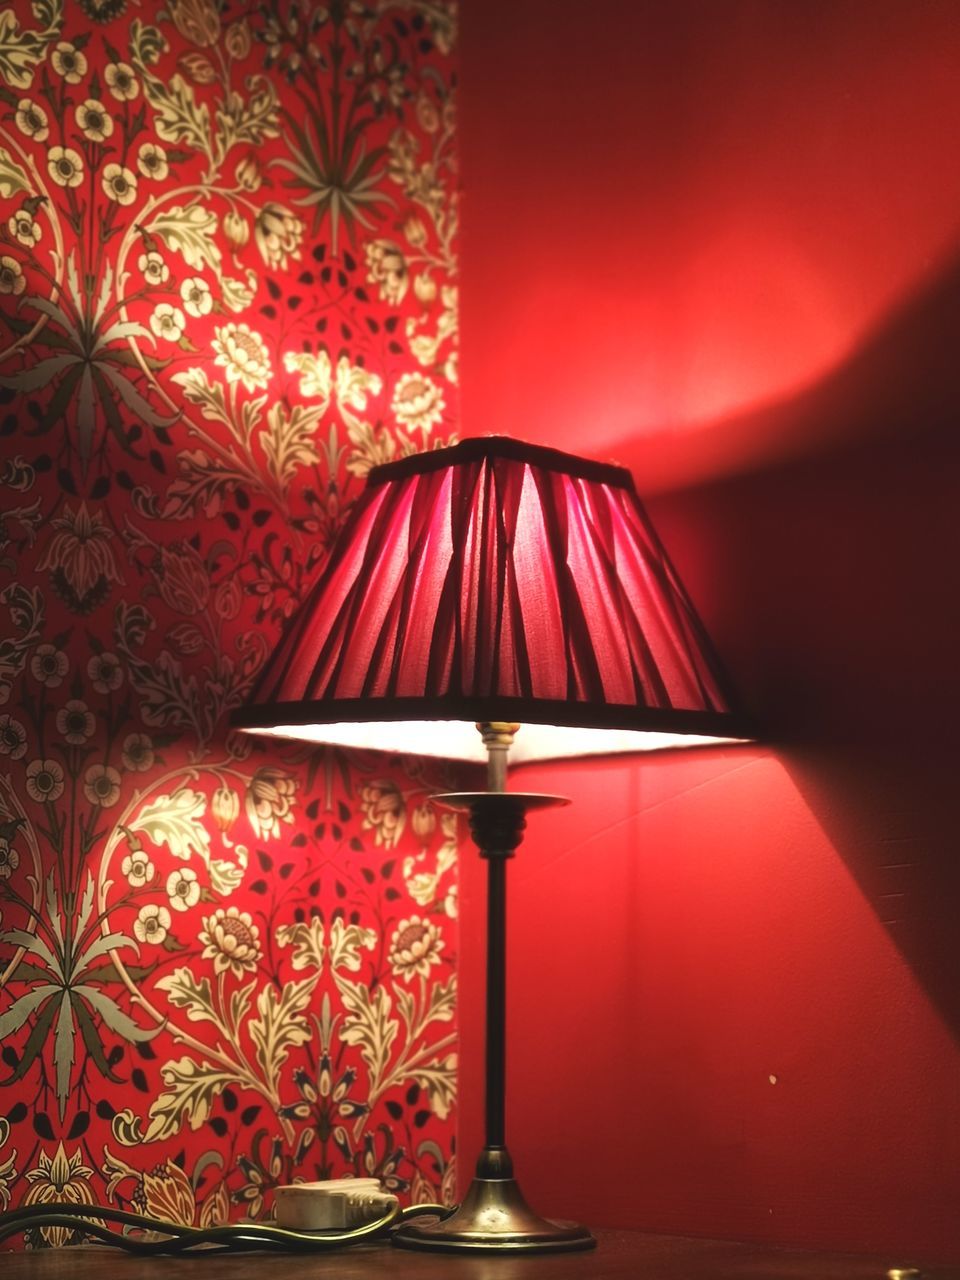 CLOSE-UP OF ILLUMINATED ELECTRIC LAMP AGAINST WALL